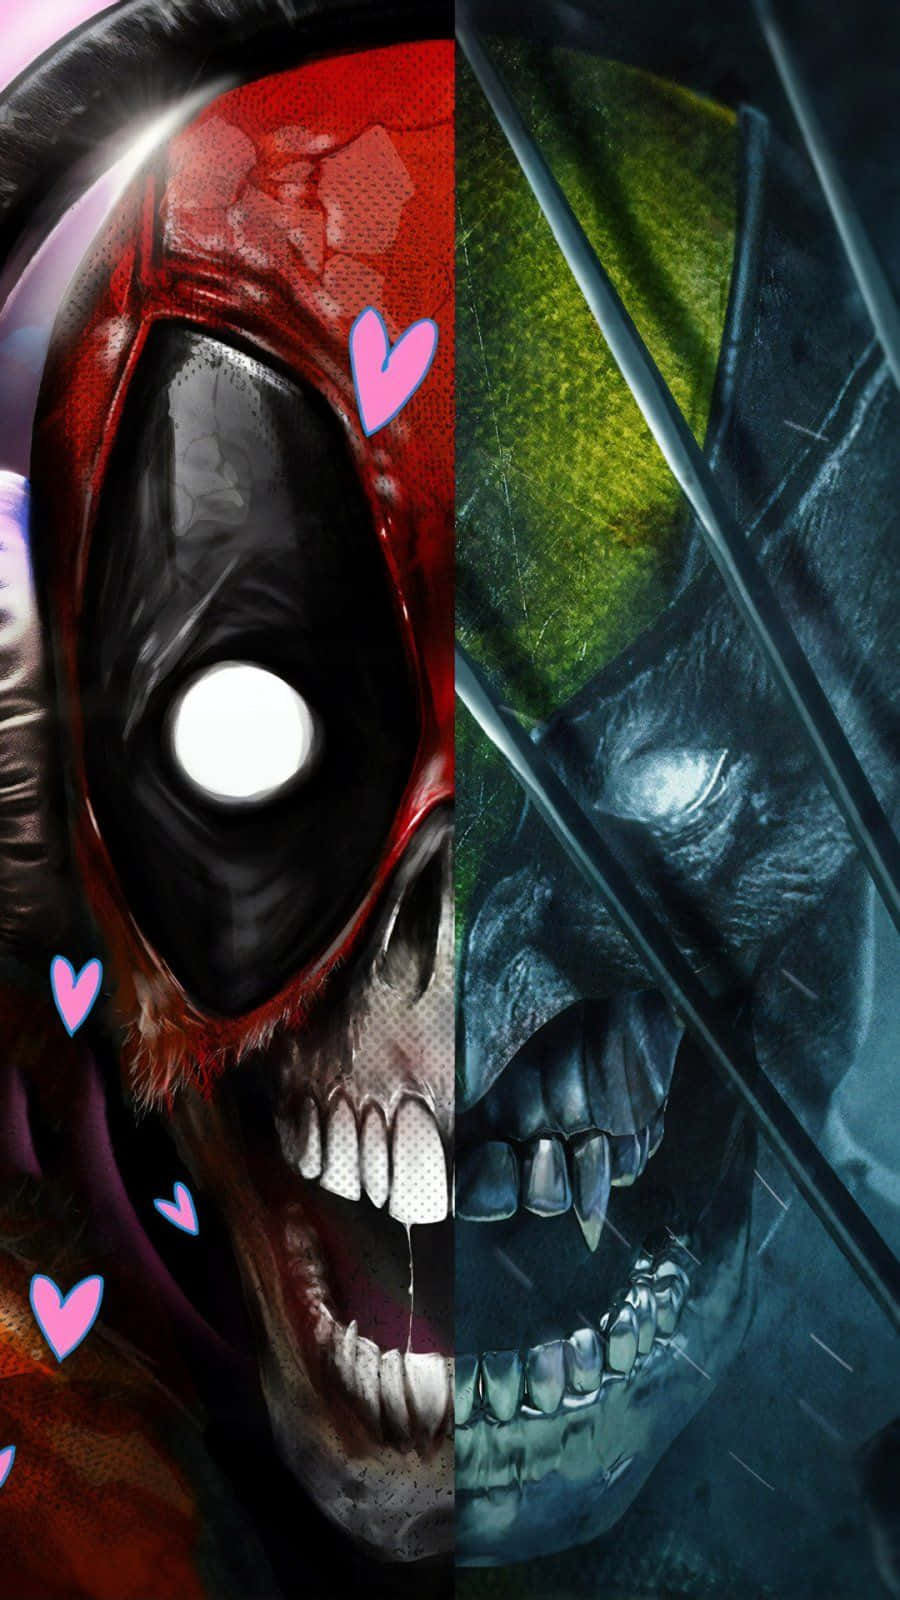 "Make a statement with your phone and outfit with this Deadpool iPhone wallpaper!" Wallpaper